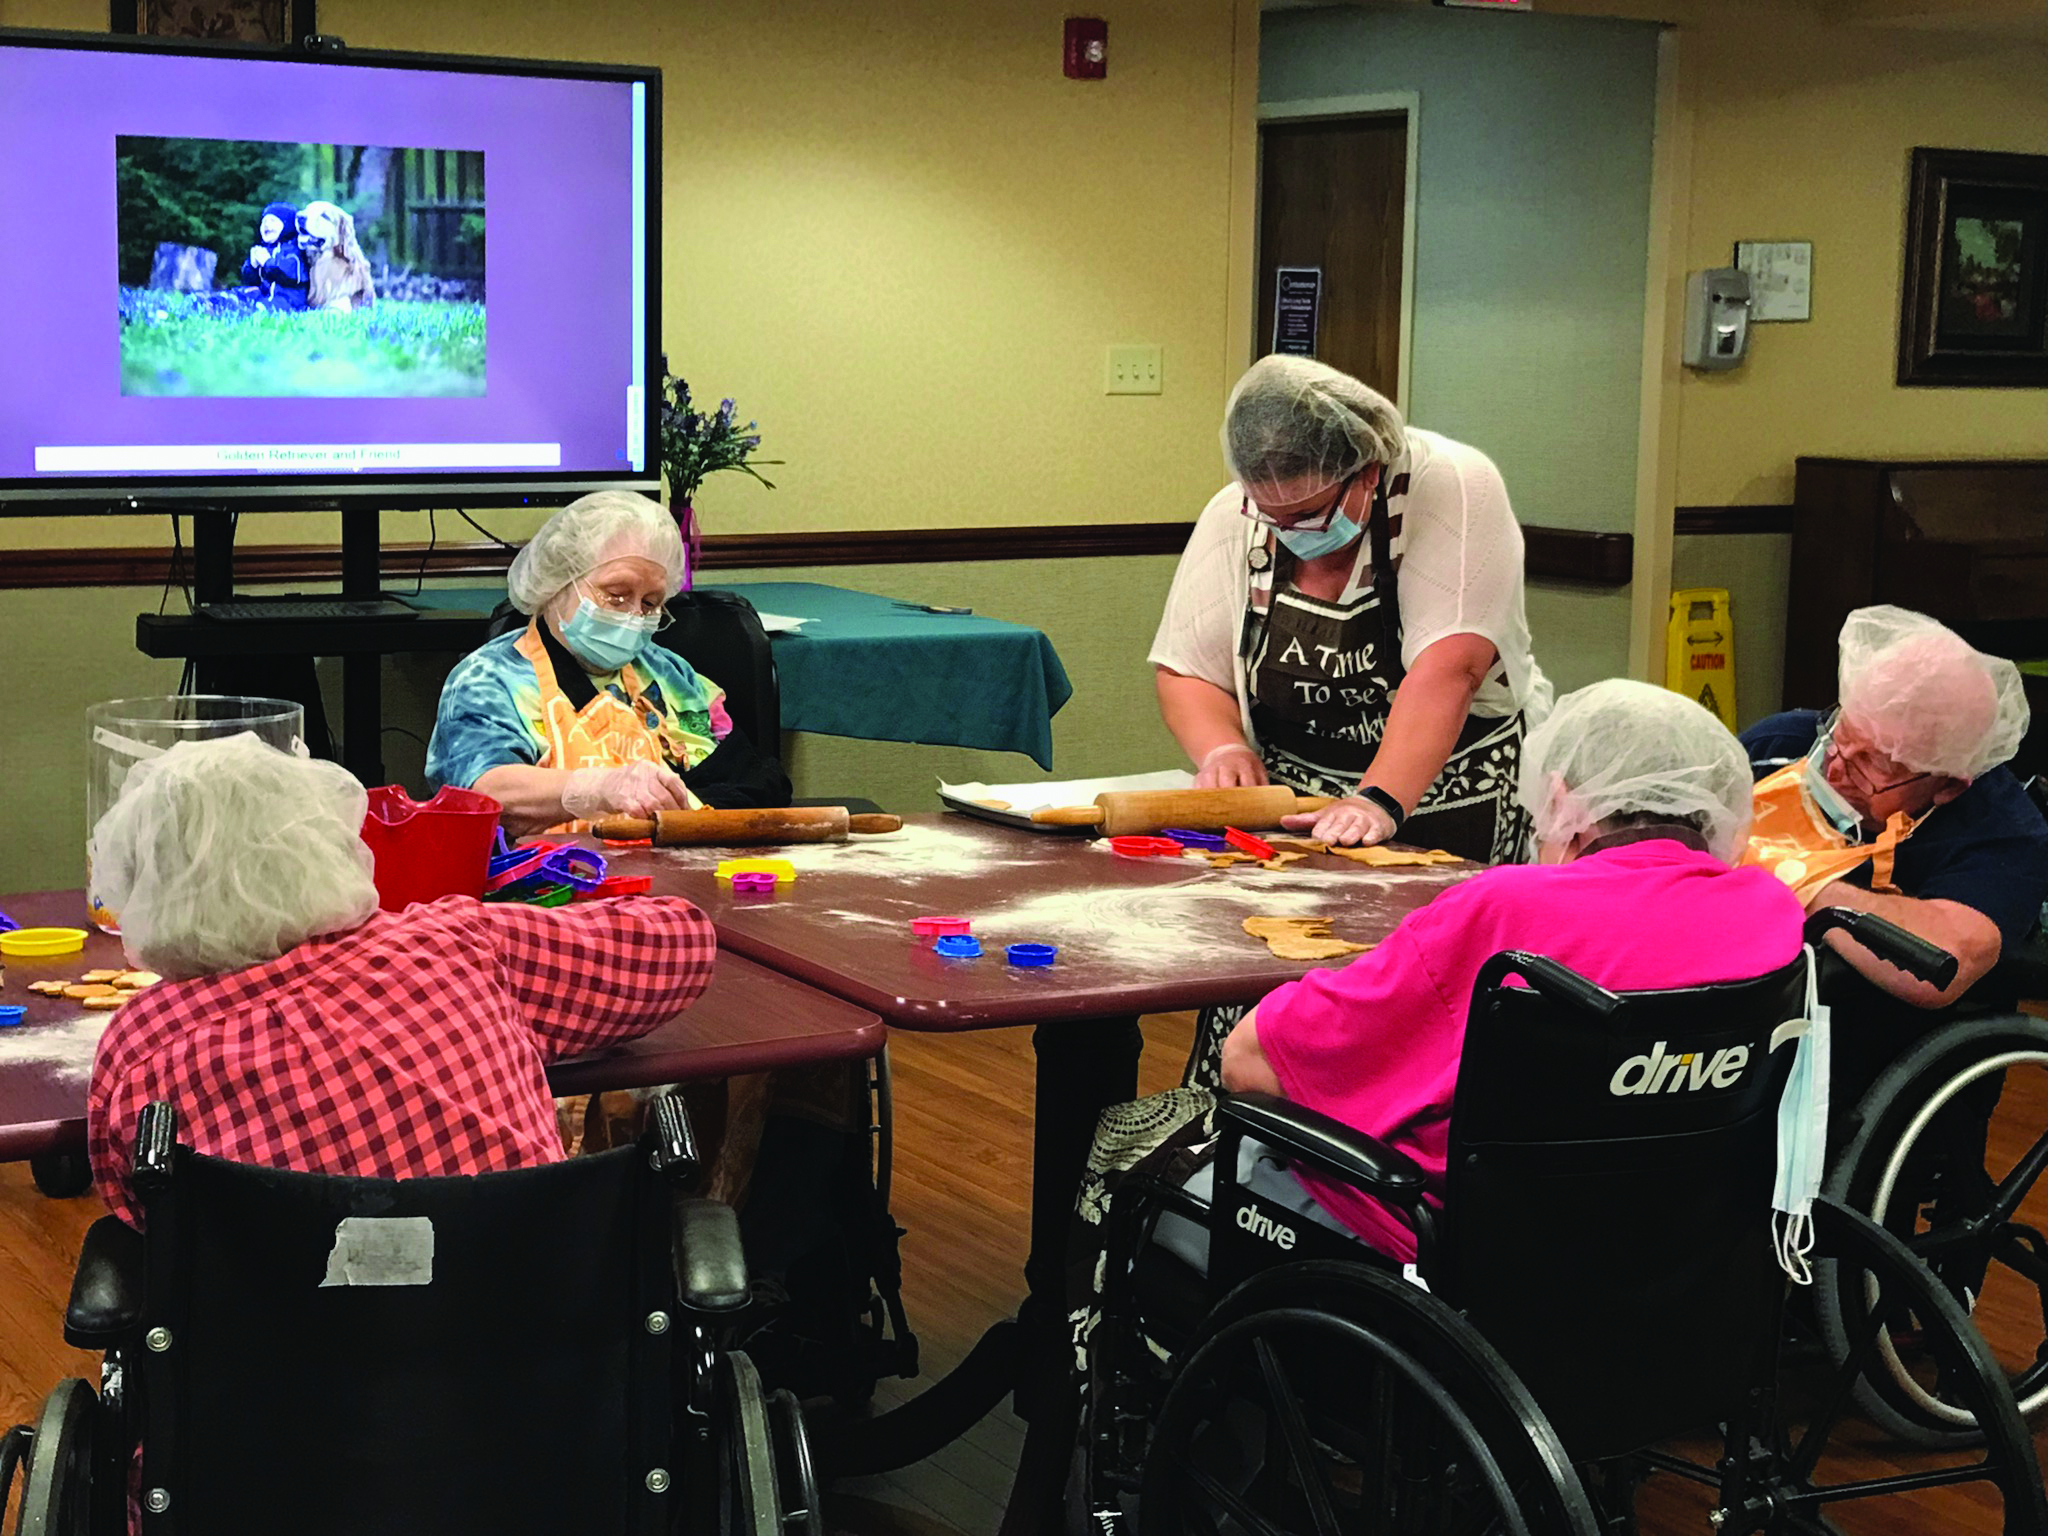 The Harmar Place Community residents participate in a group activity with iN2L technology.